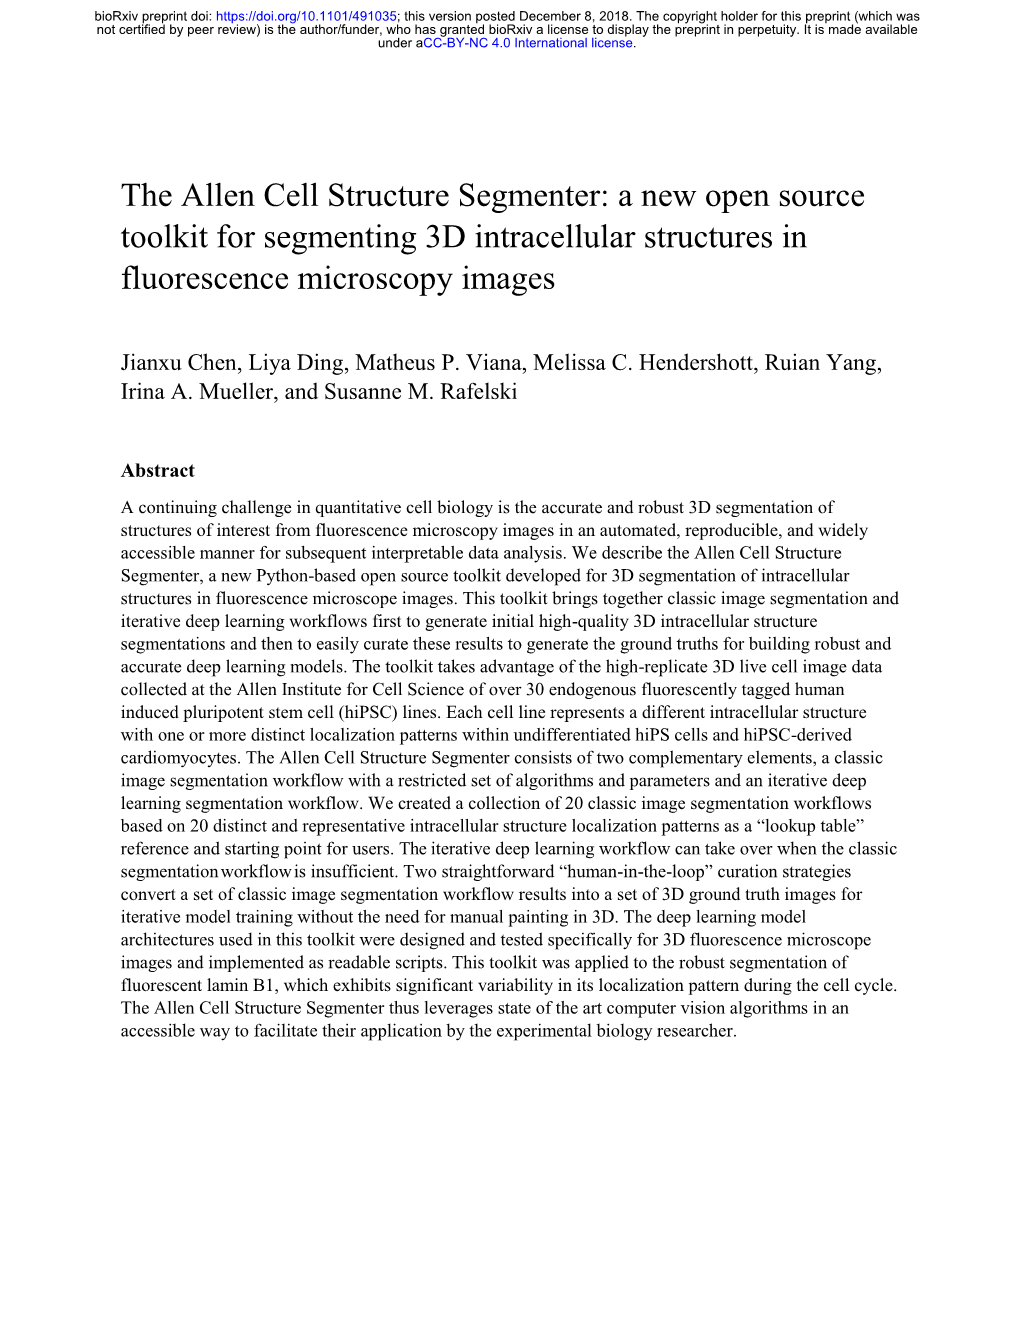 The Allen Cell Structure Segmenter: a New Open Source Toolkit for Segmenting 3D Intracellular Structures in Fluorescence Microscopy Images